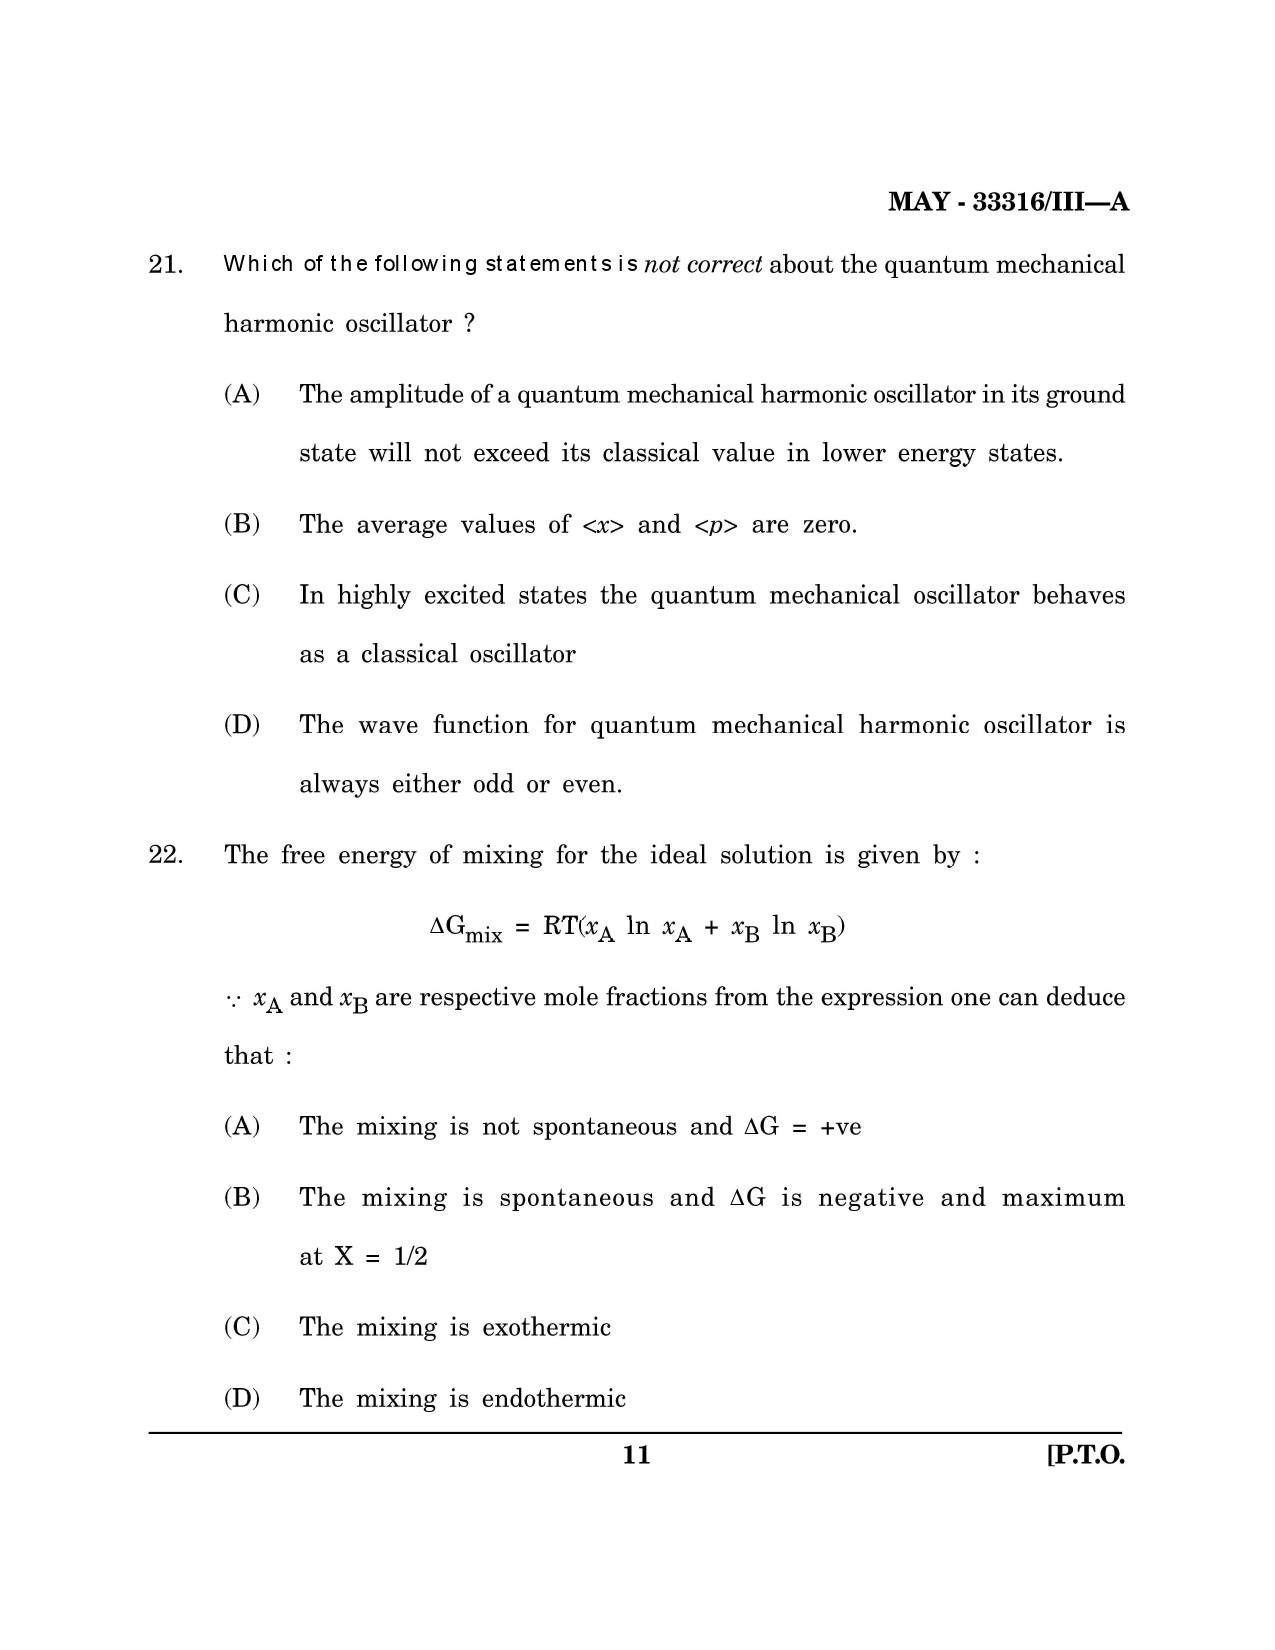 Maharashtra SET Chemical Sciences Question Paper III May 2016 10